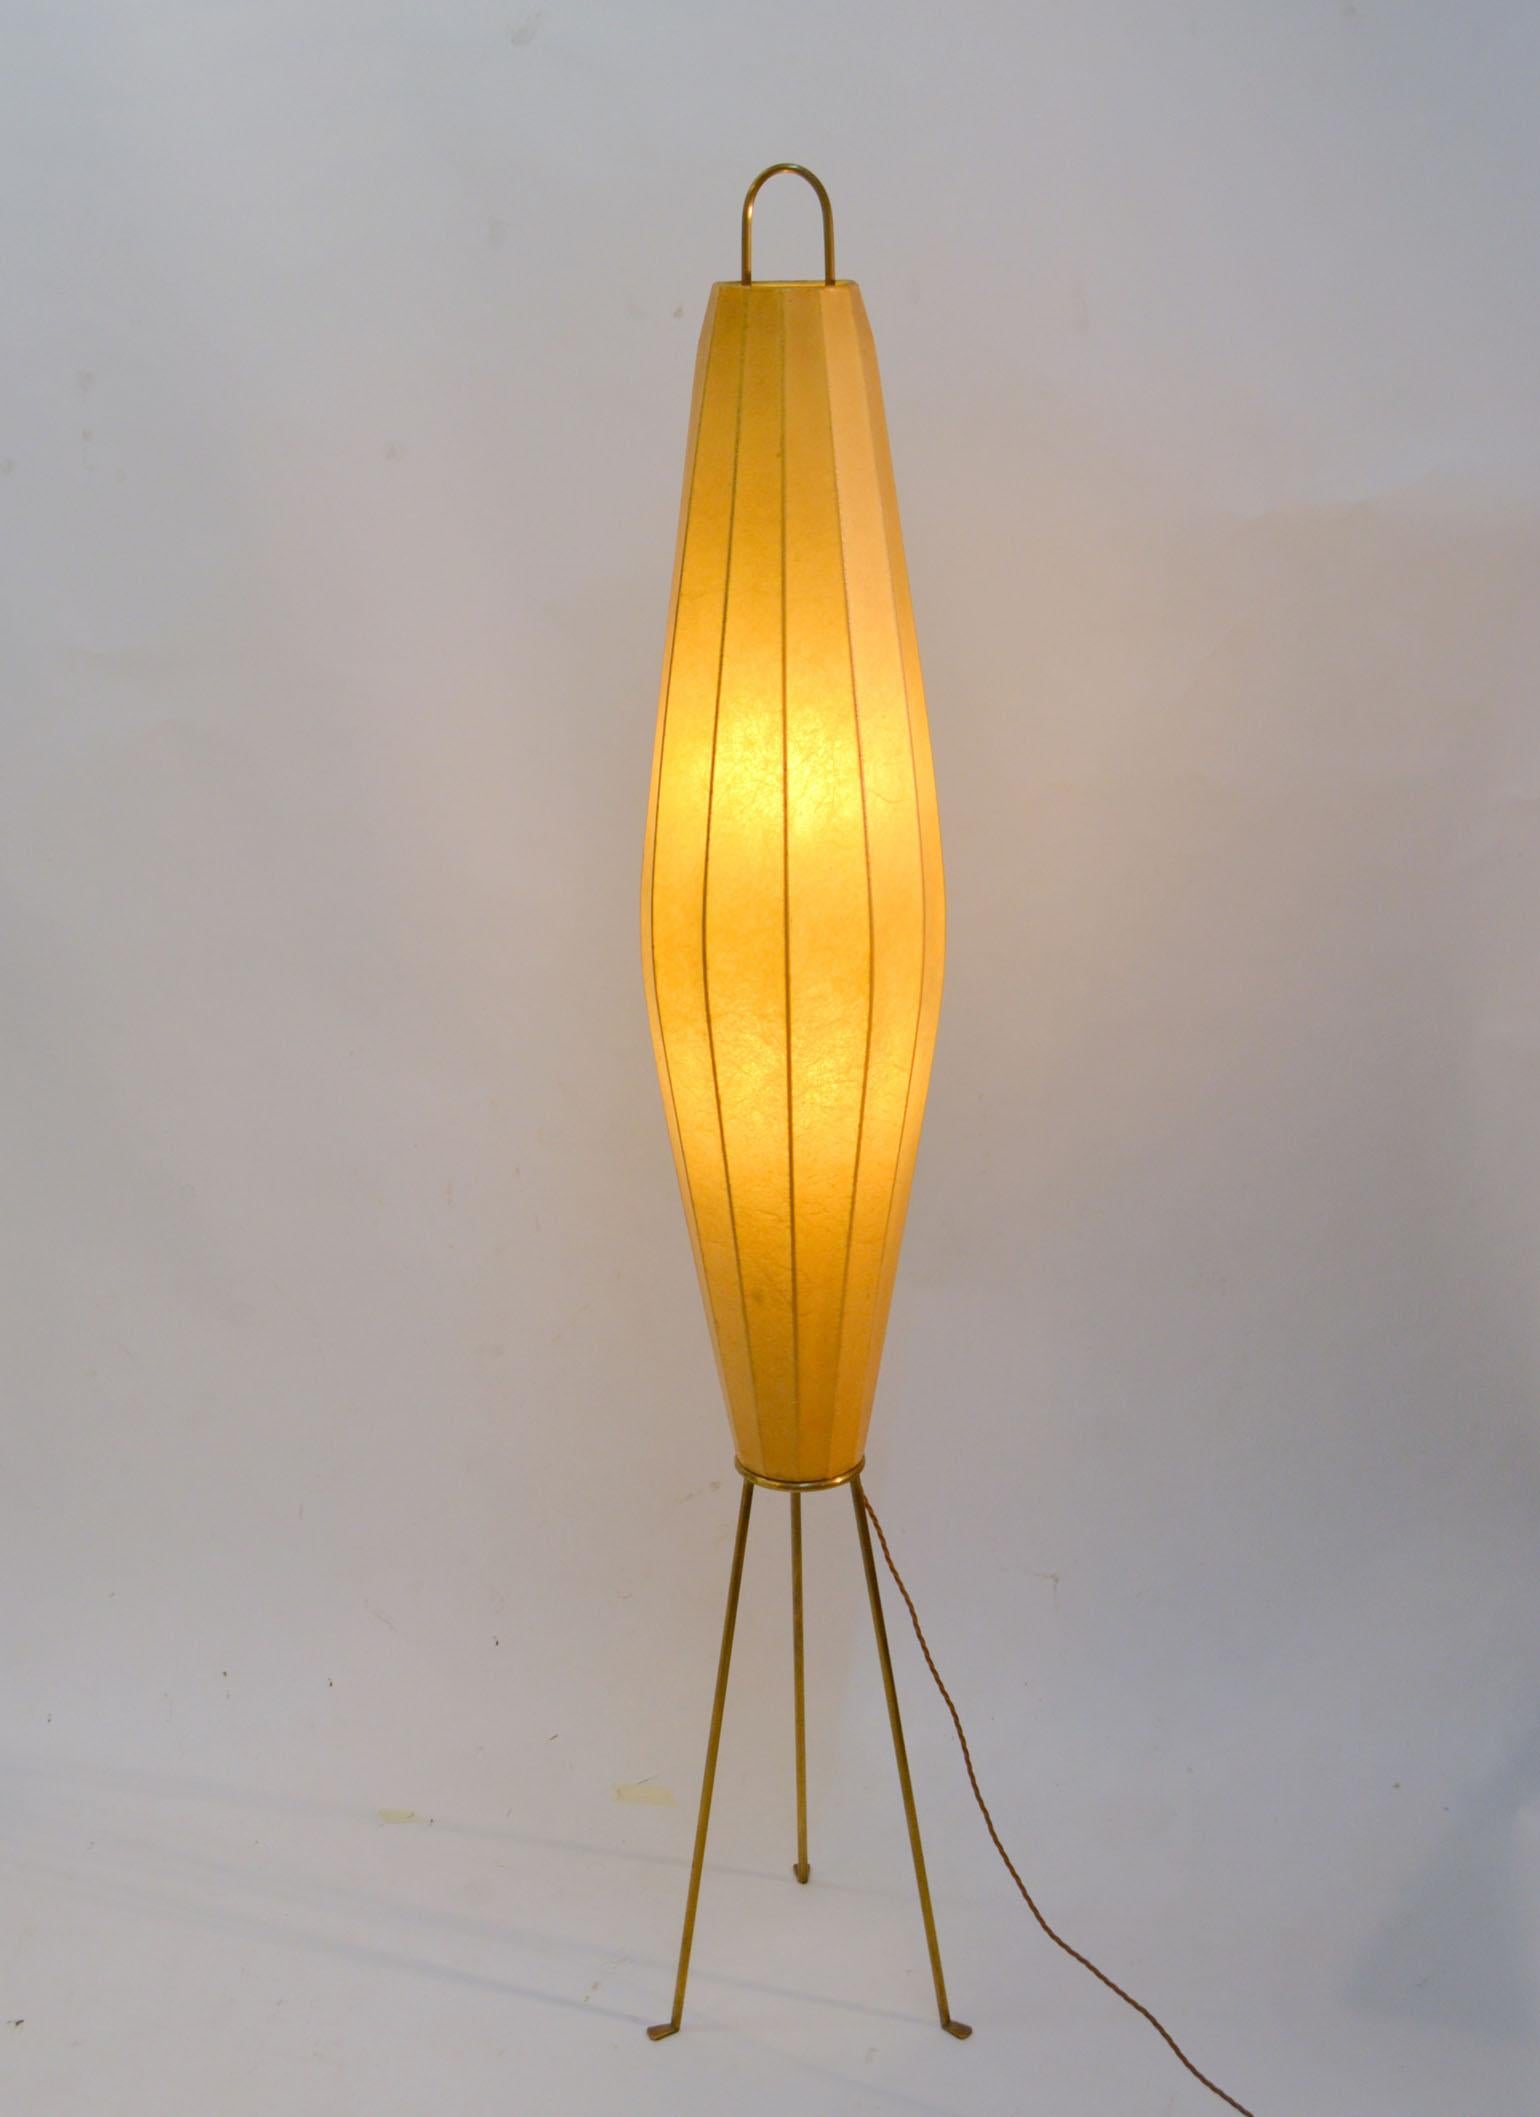 Biomorphic 1950's floor lamp with elongated cocoon shape shade made from spun fiber stands on brass tripod legs with turned duck feet by H.Klingele for Artimeta in The Netherlands during the 1950s. The style of shade making is reminiscent of designs